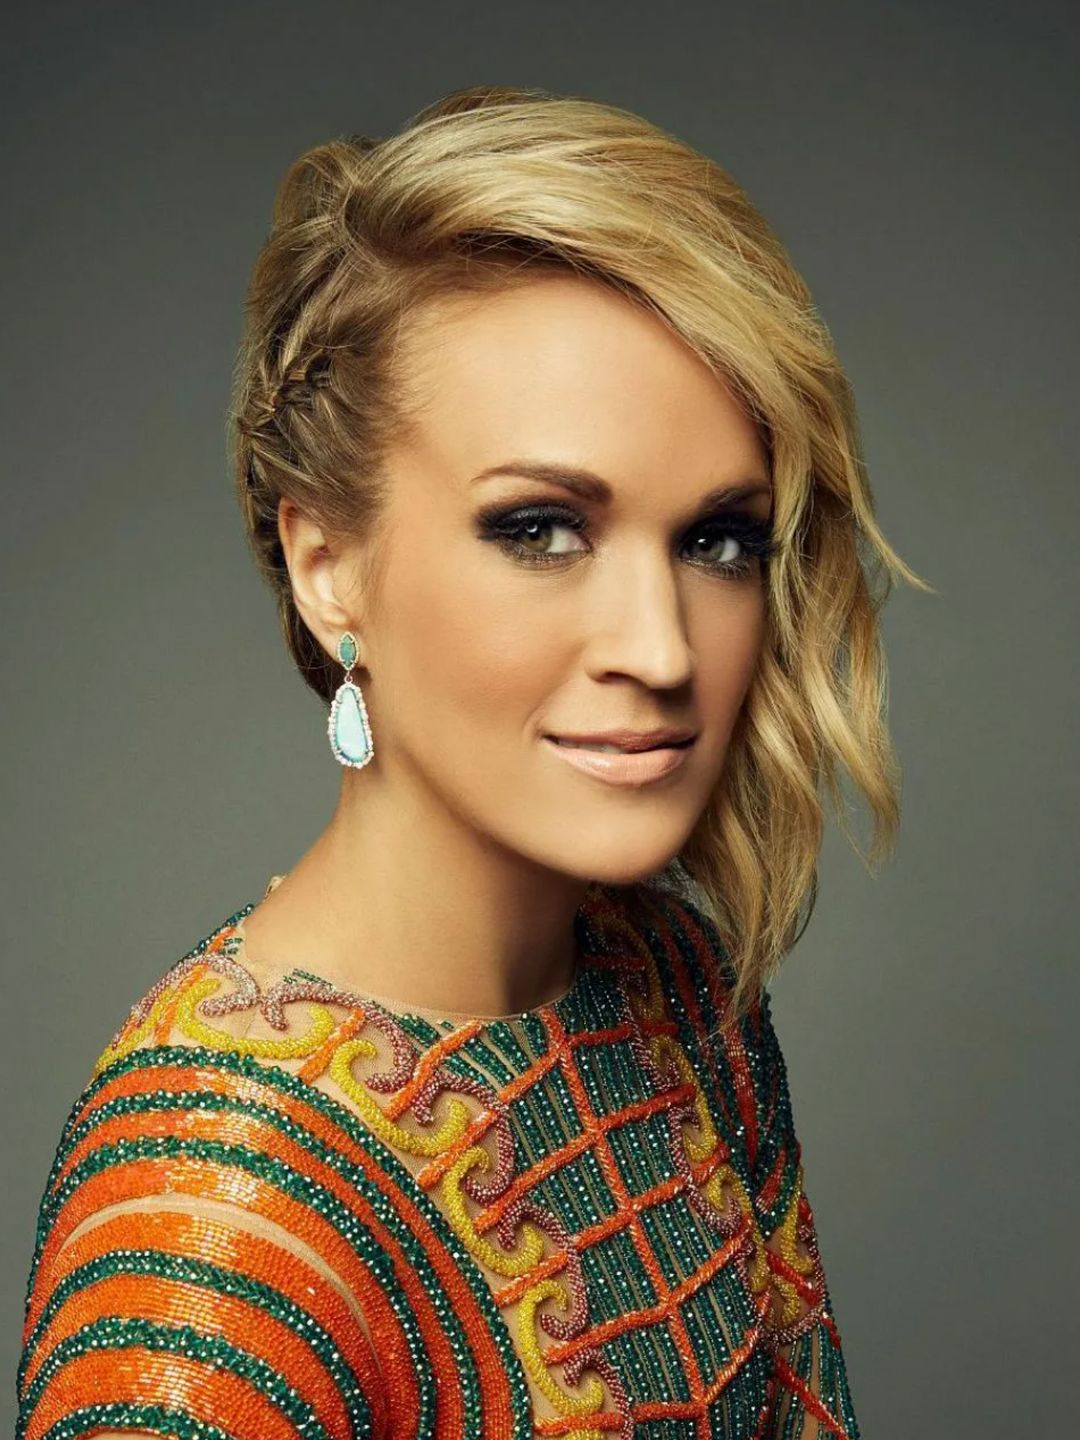 Carrie Underwood way to success